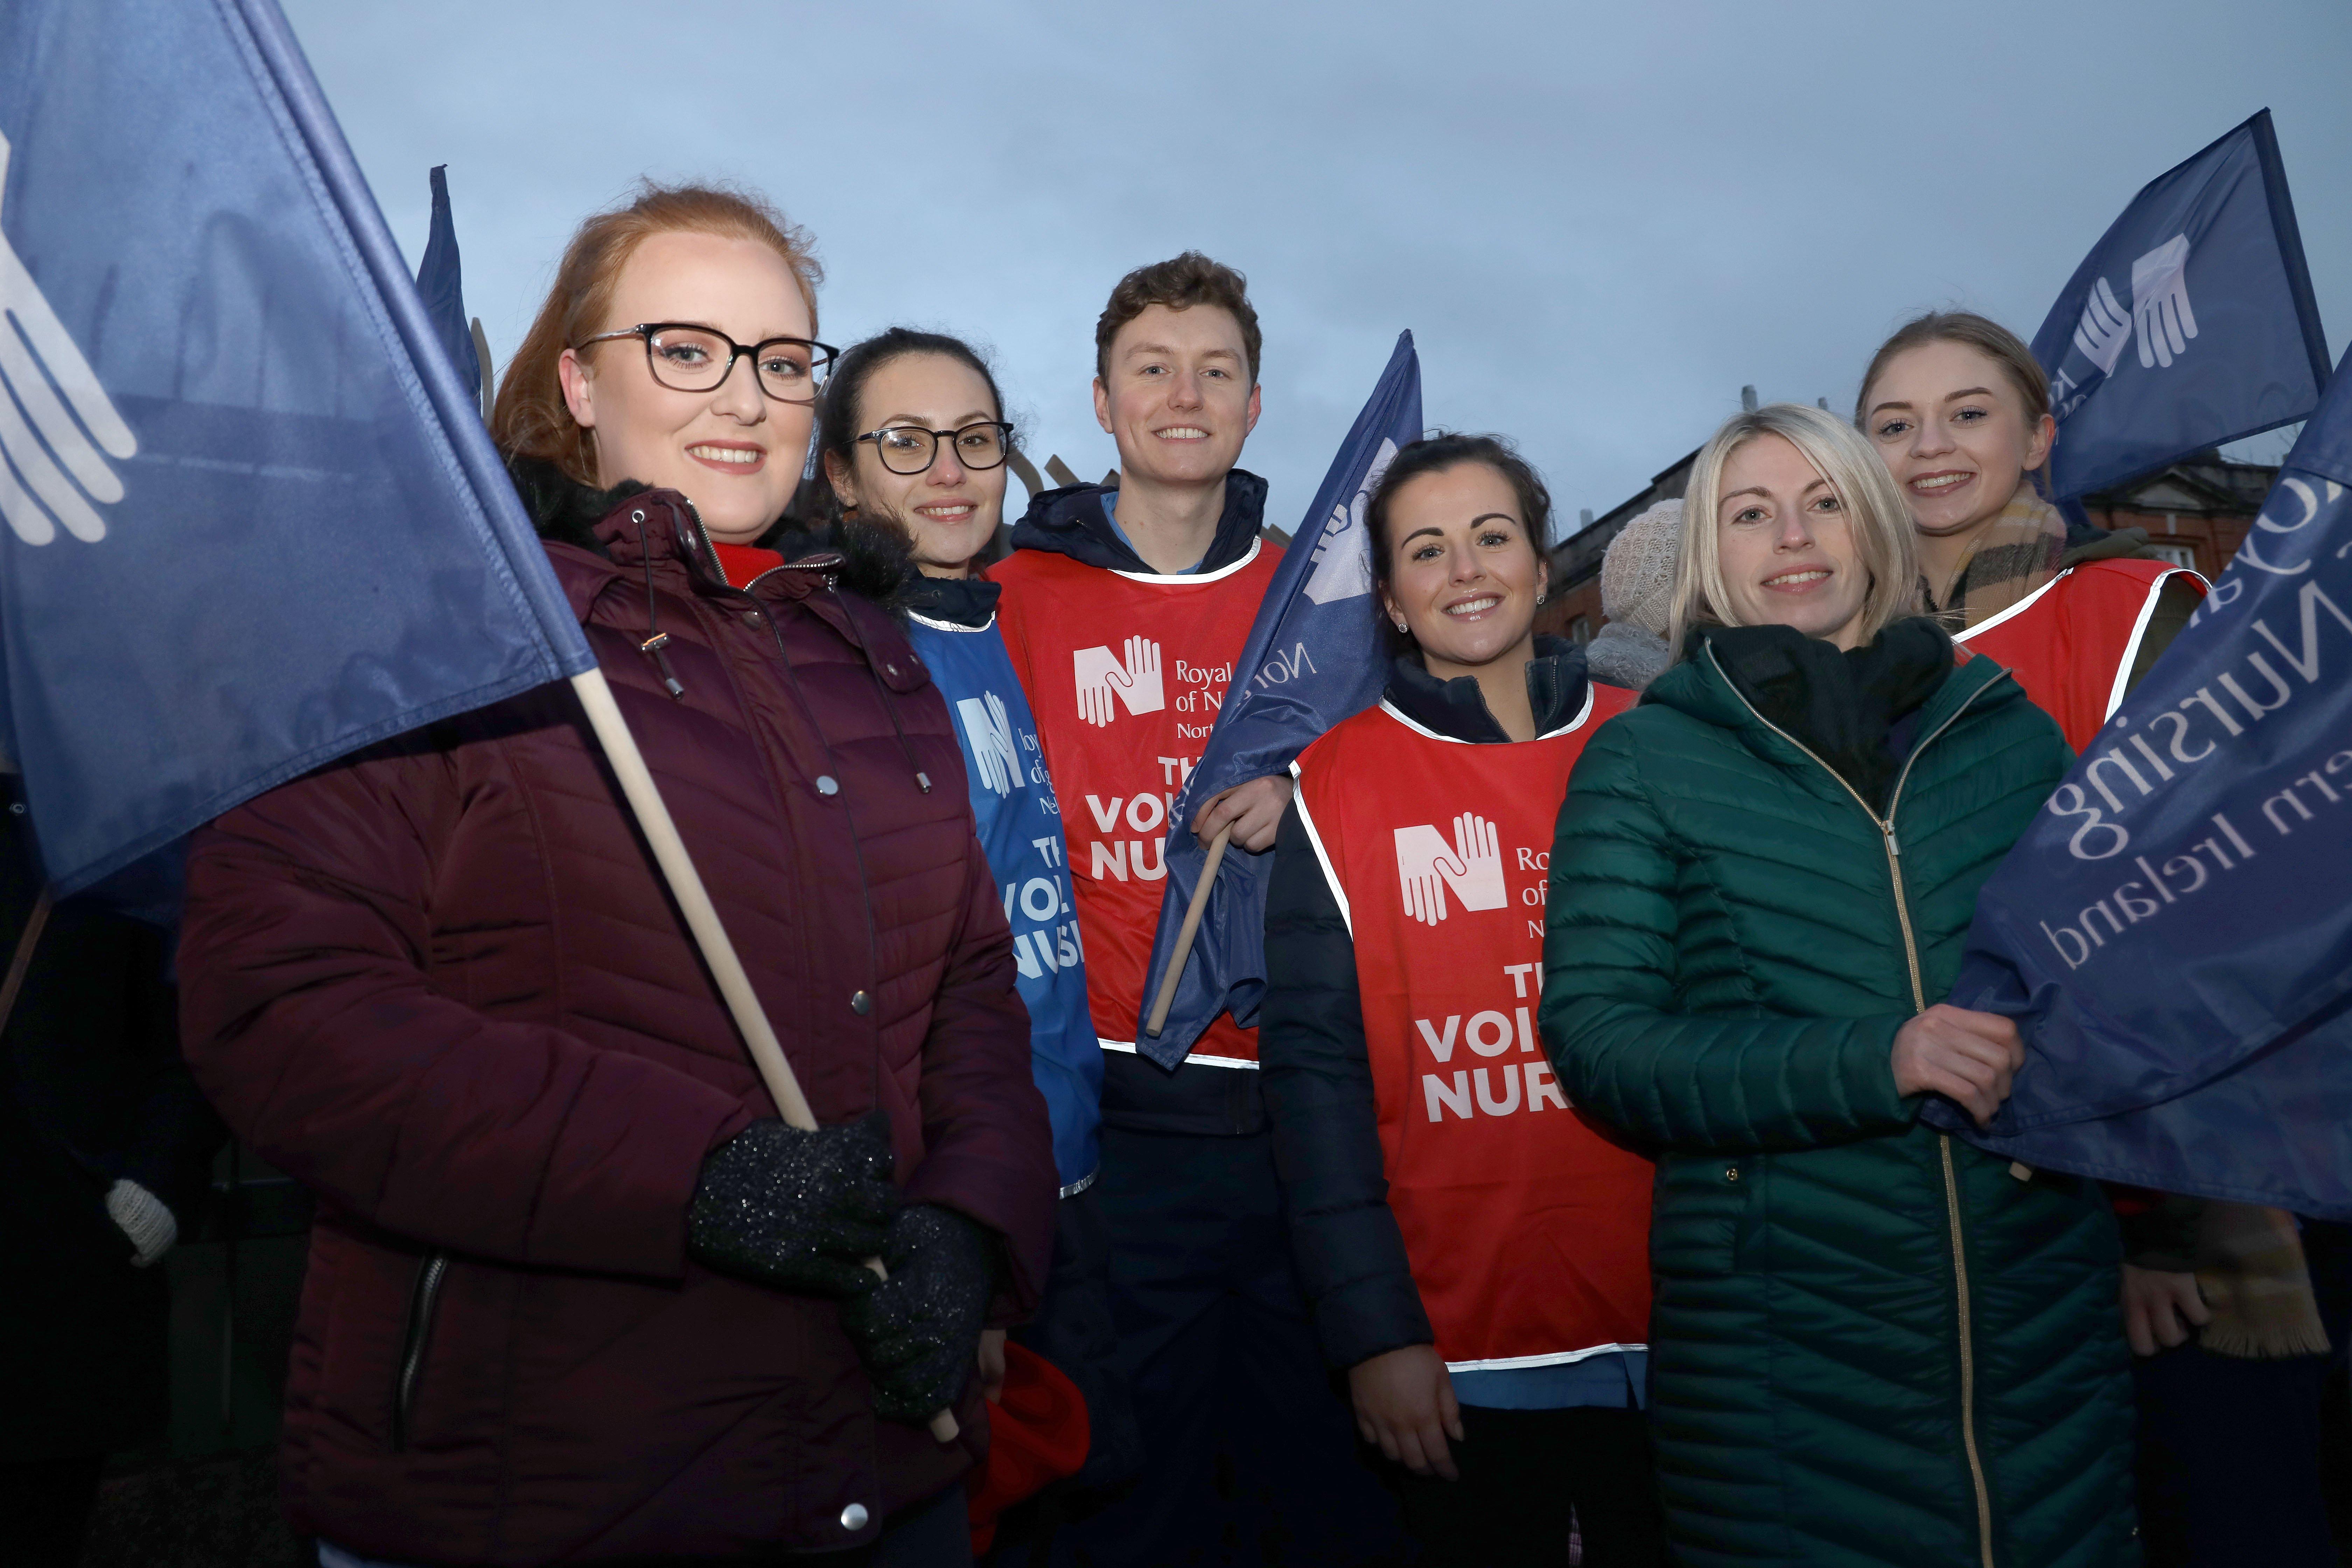 Nurses at Belfast's Royal Victoria Hospital as the RCN take strike action. About 9,000 nurses across Northern Ireland have begun a 12-hour strike. The action began at 8am on Wednesday in a second wave of protests over pay and staffing levels